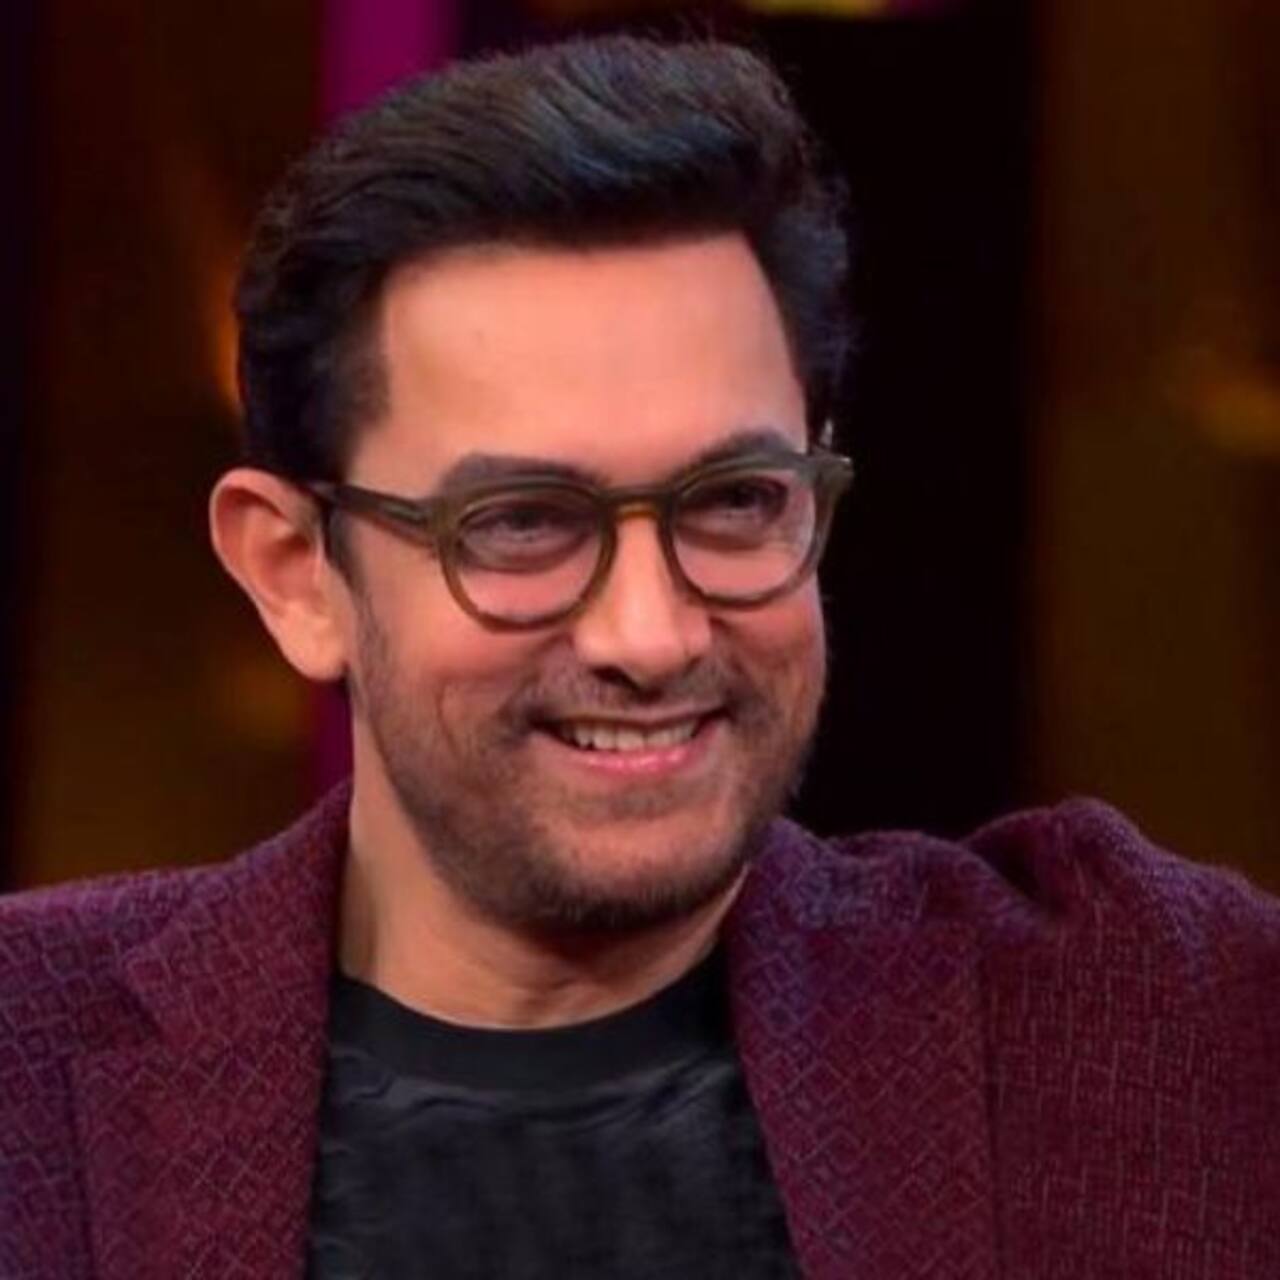 Aamir Khan to make his web series debut soon? – here's what we know